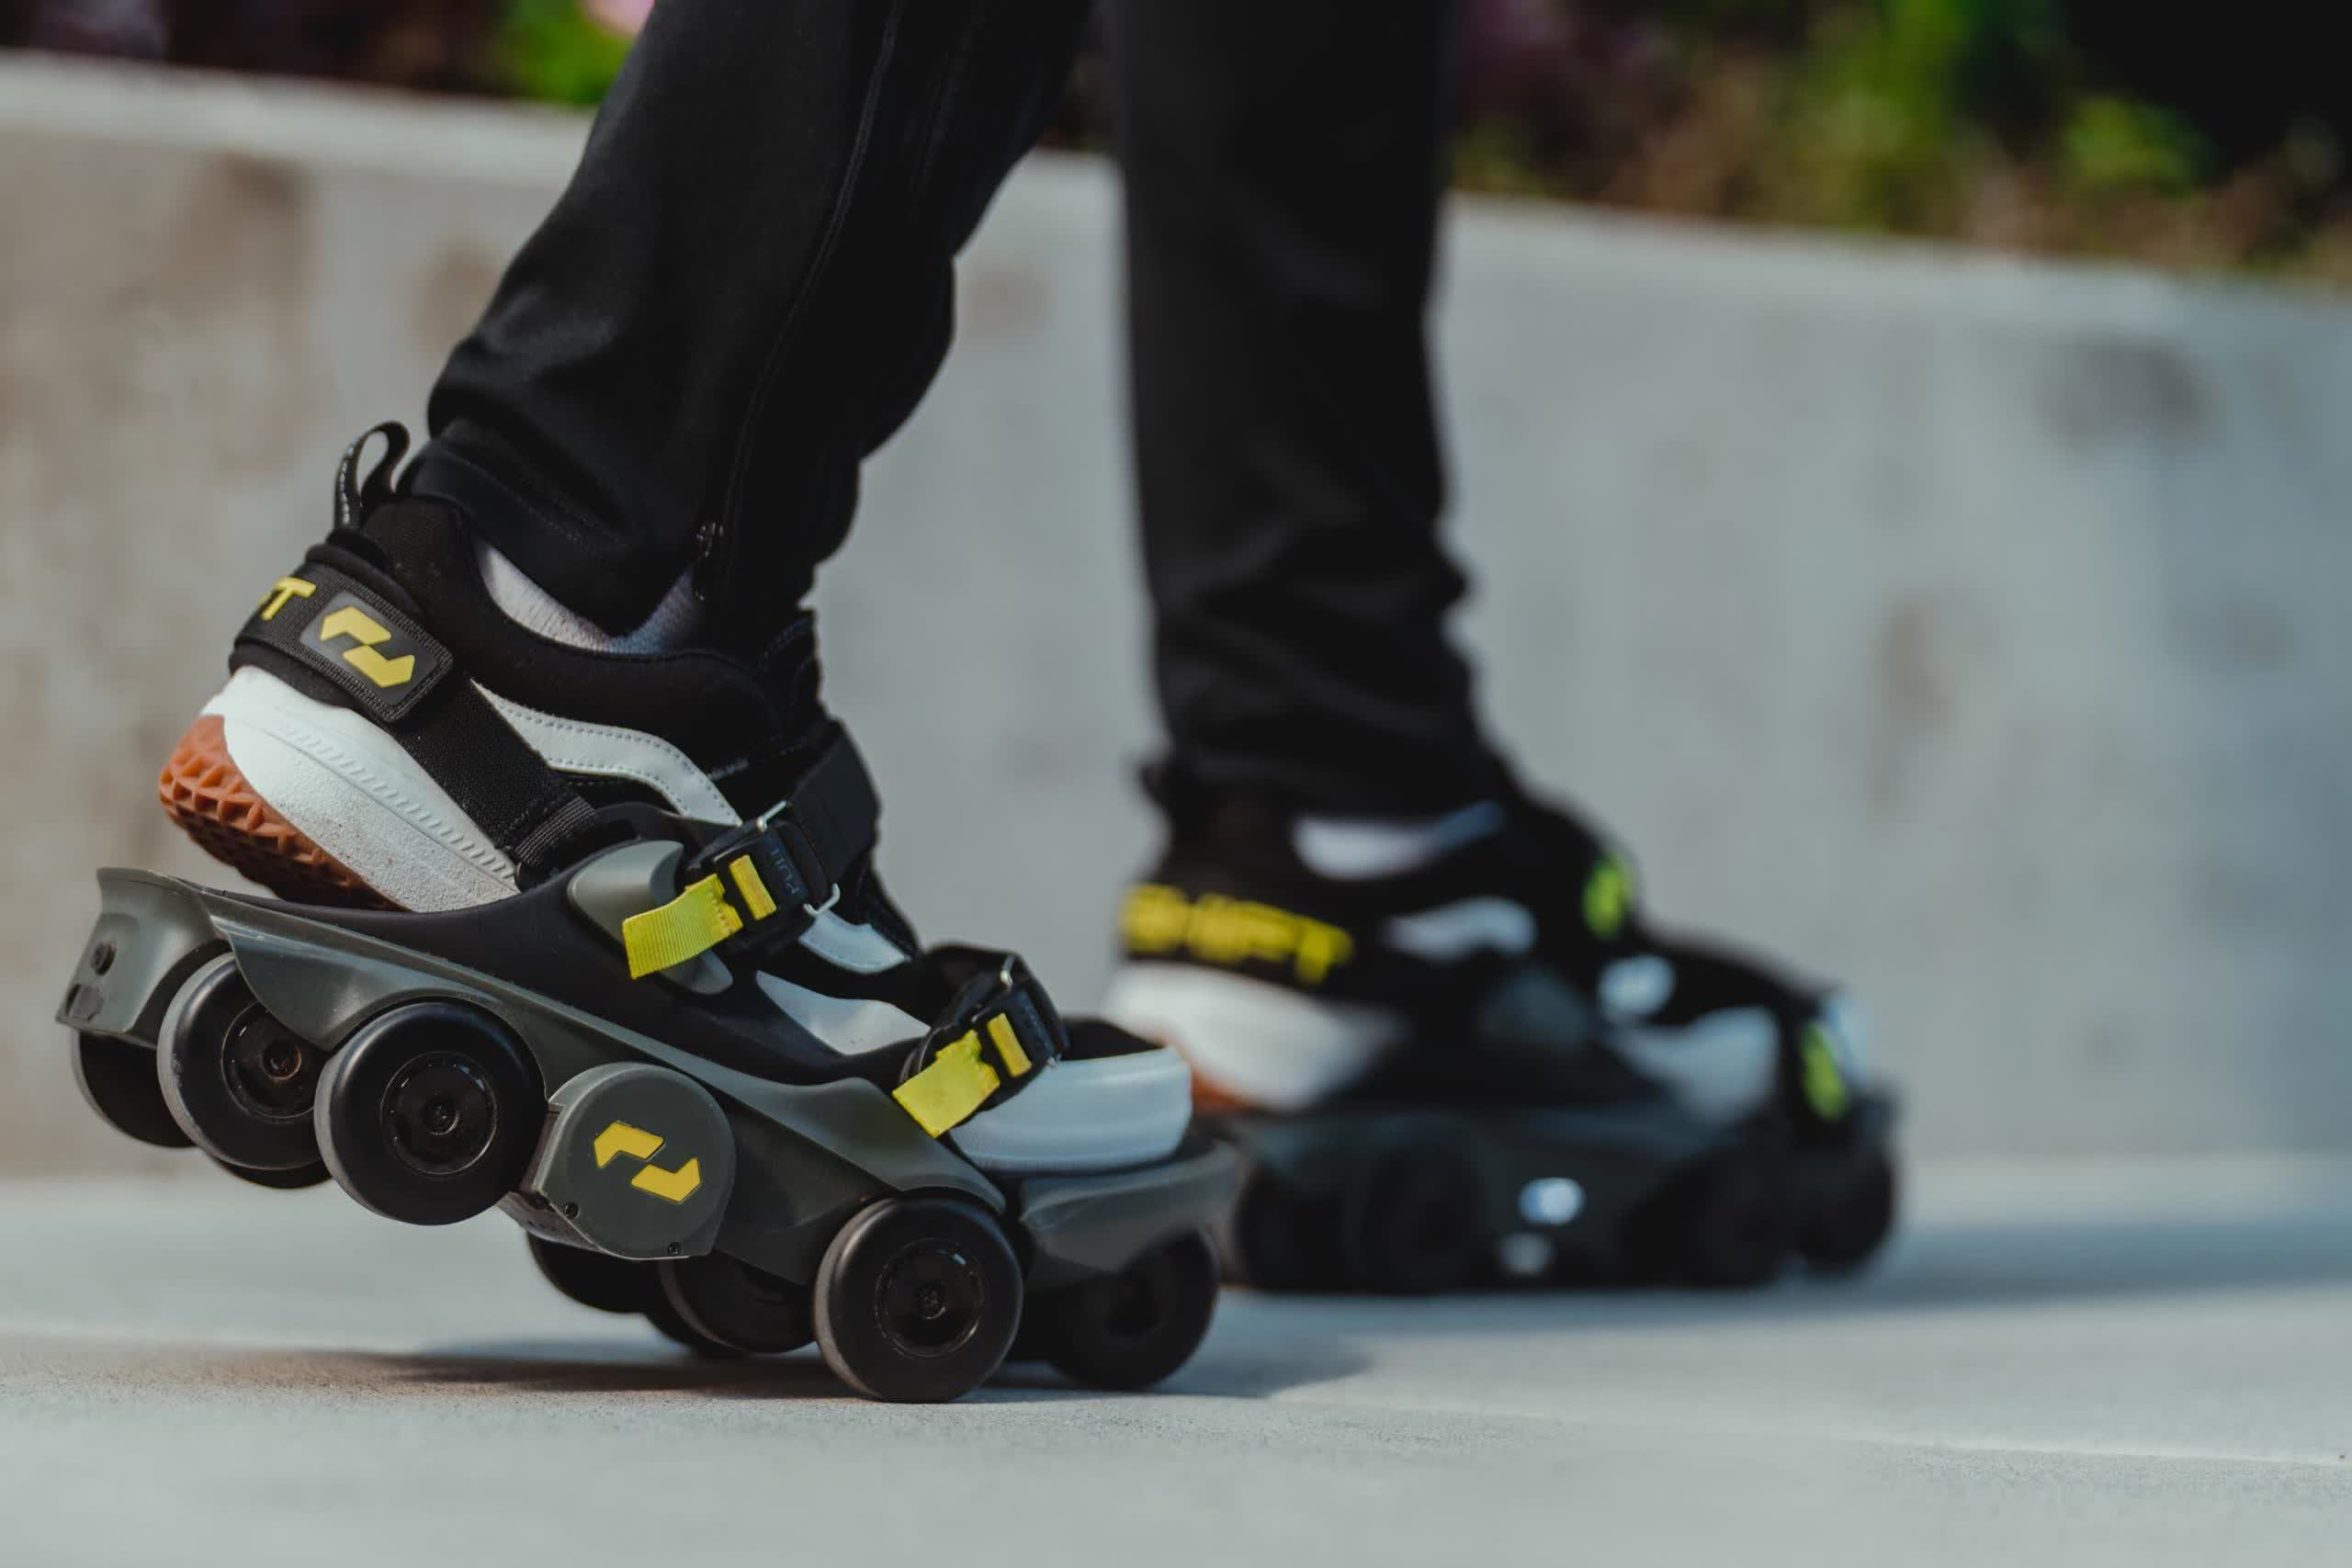 Robotics startup develops shoe accessory that increases your walking speed to a run